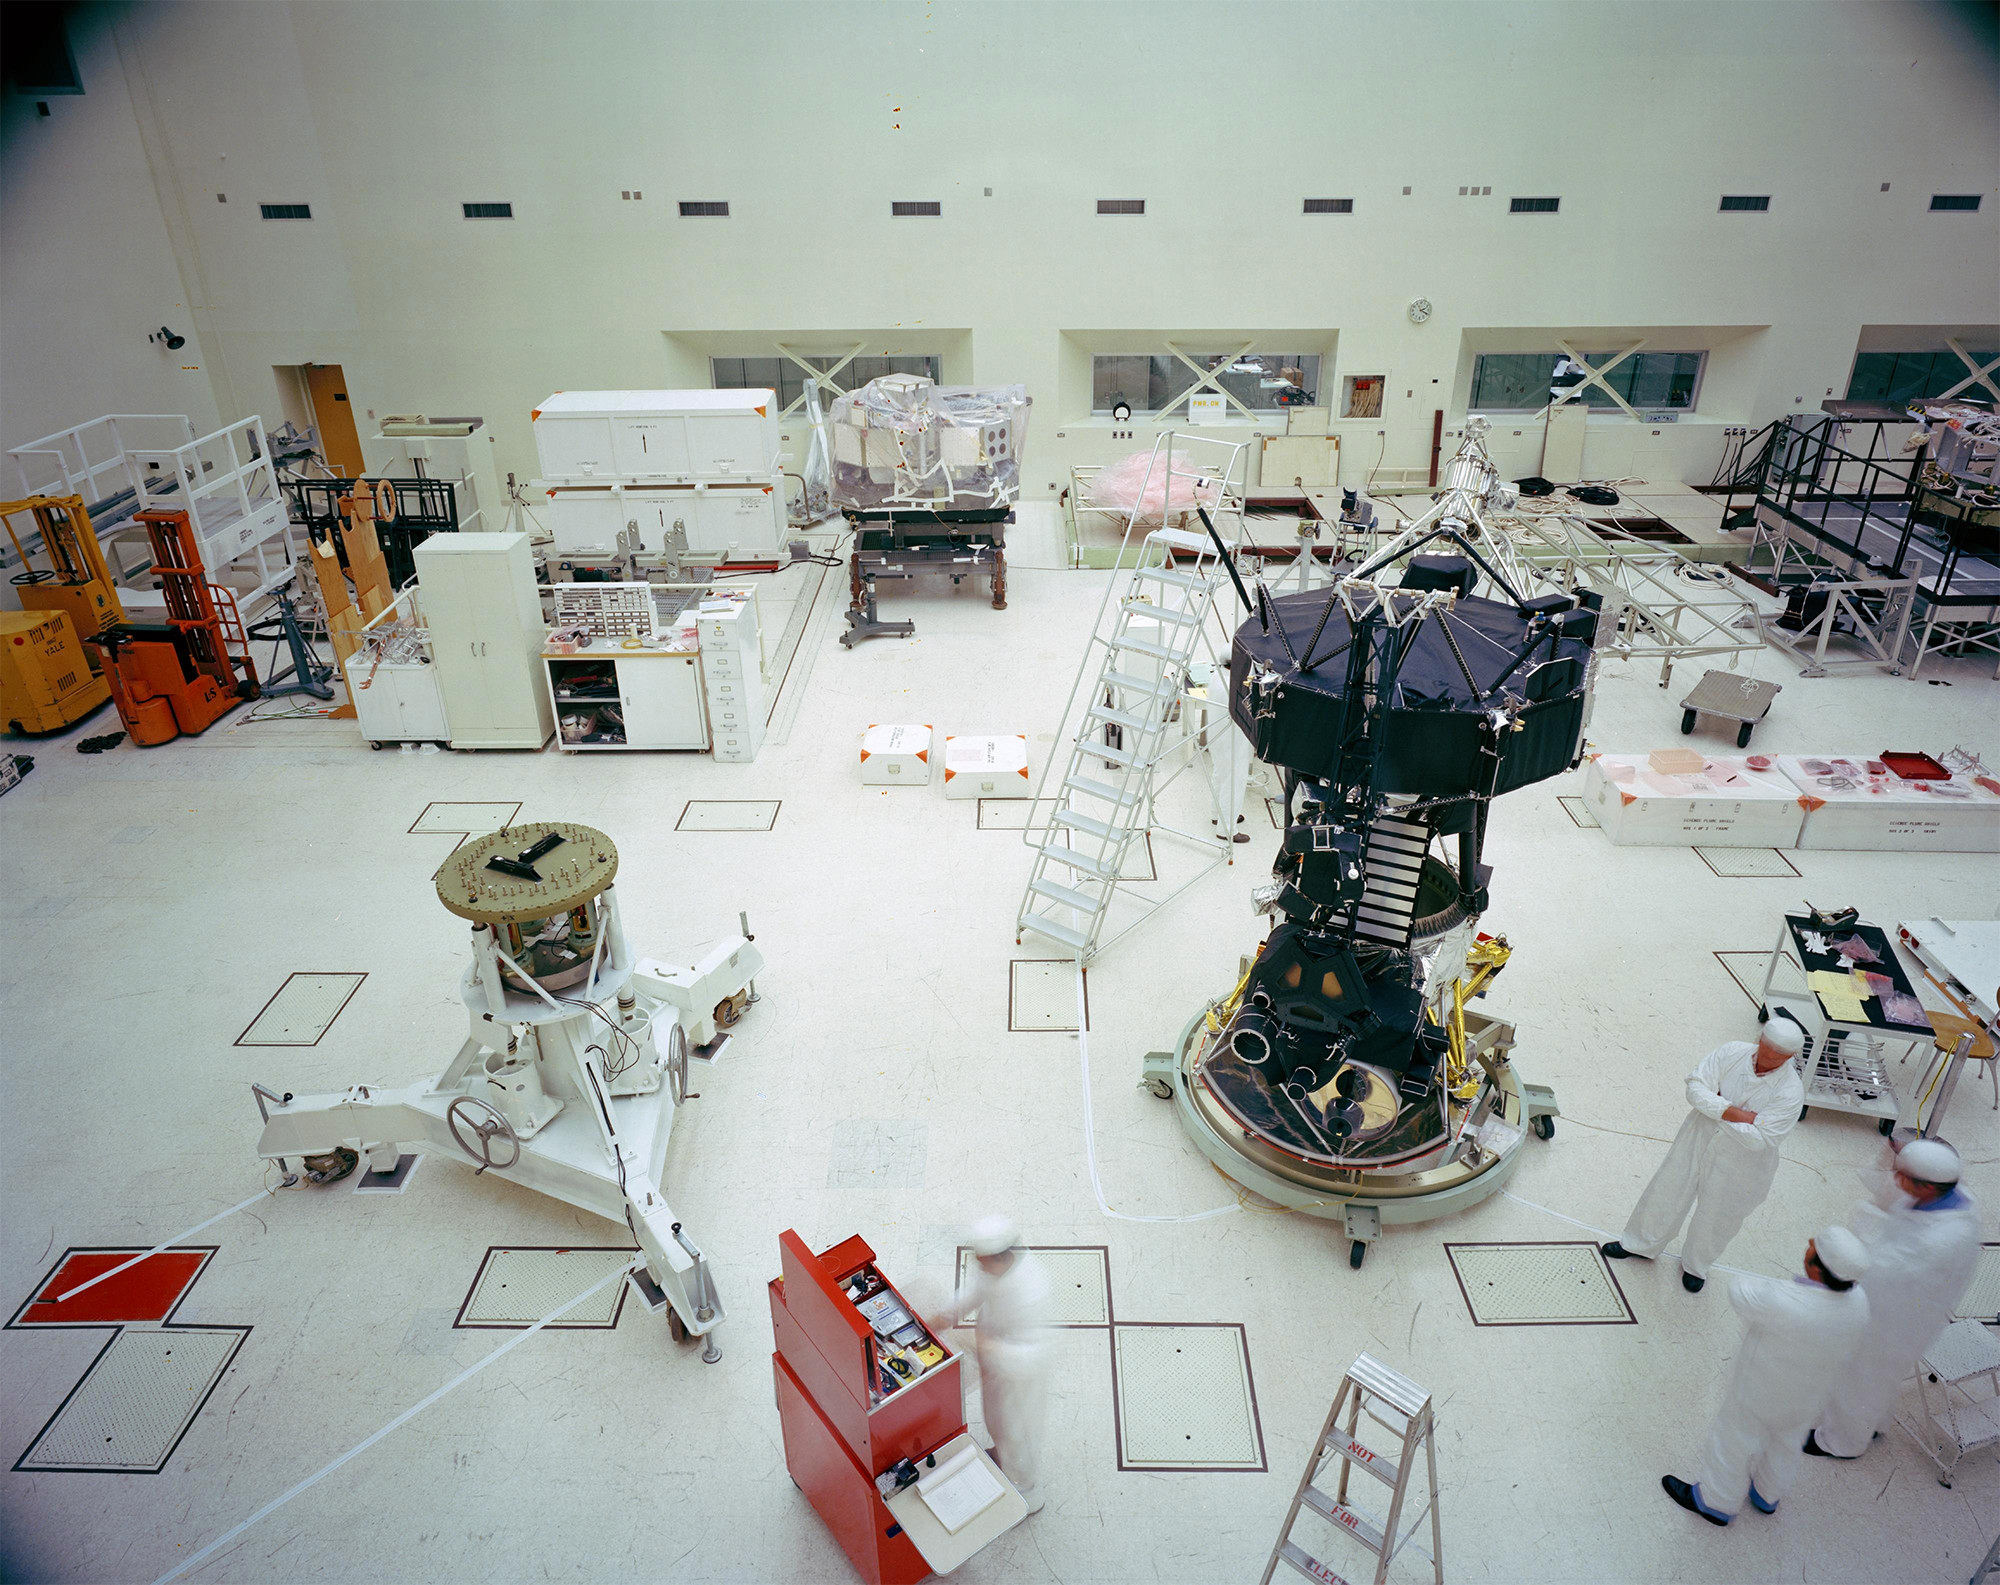 Voyager Proof Test Model (in the foreground right of center) undergoing a mechanical preparation and weight center of gravity test